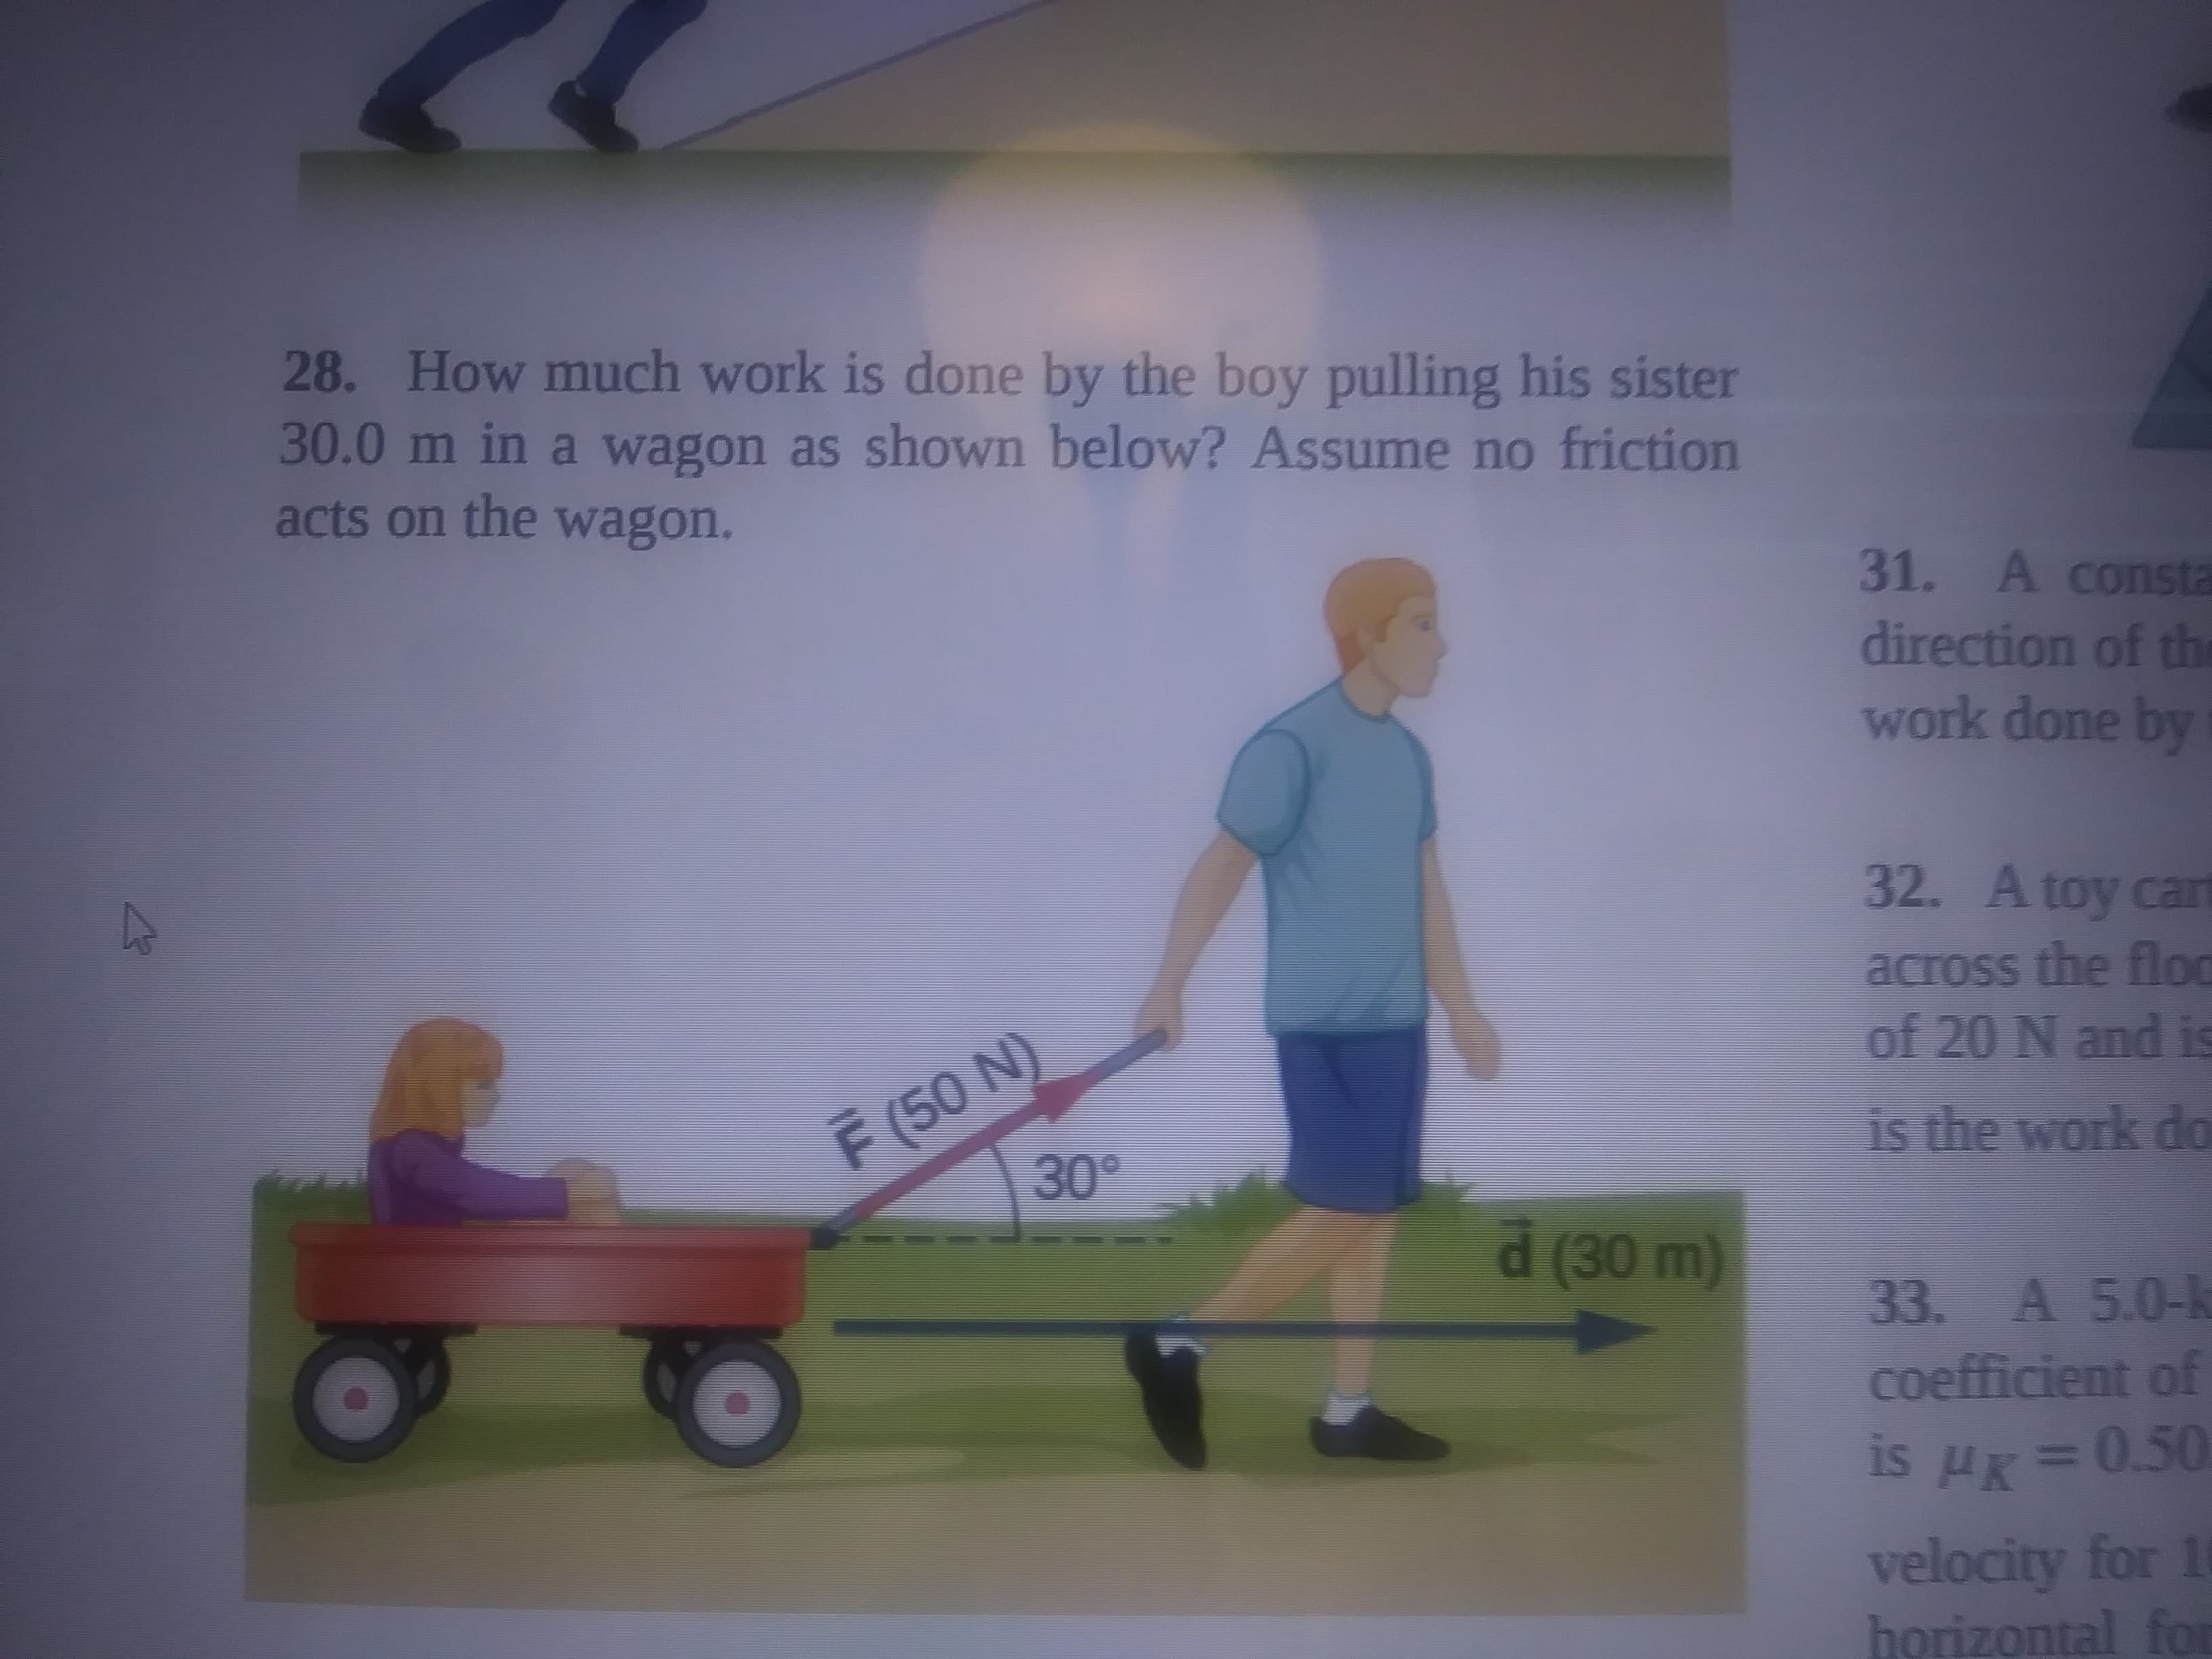 28. How much work is done by the boy pulling his sister
30.0m in a wagon as shown below? Assume no friction
31. A consta
direction of the
work done by
acts on the wagon.
32. Atoy cart
across the flod
of 20 N and is
F (50 N)
is the work do
(30m)
33. A 5.0-k
coefficient of
is H=0.50
velocity for 10
horizontal for
